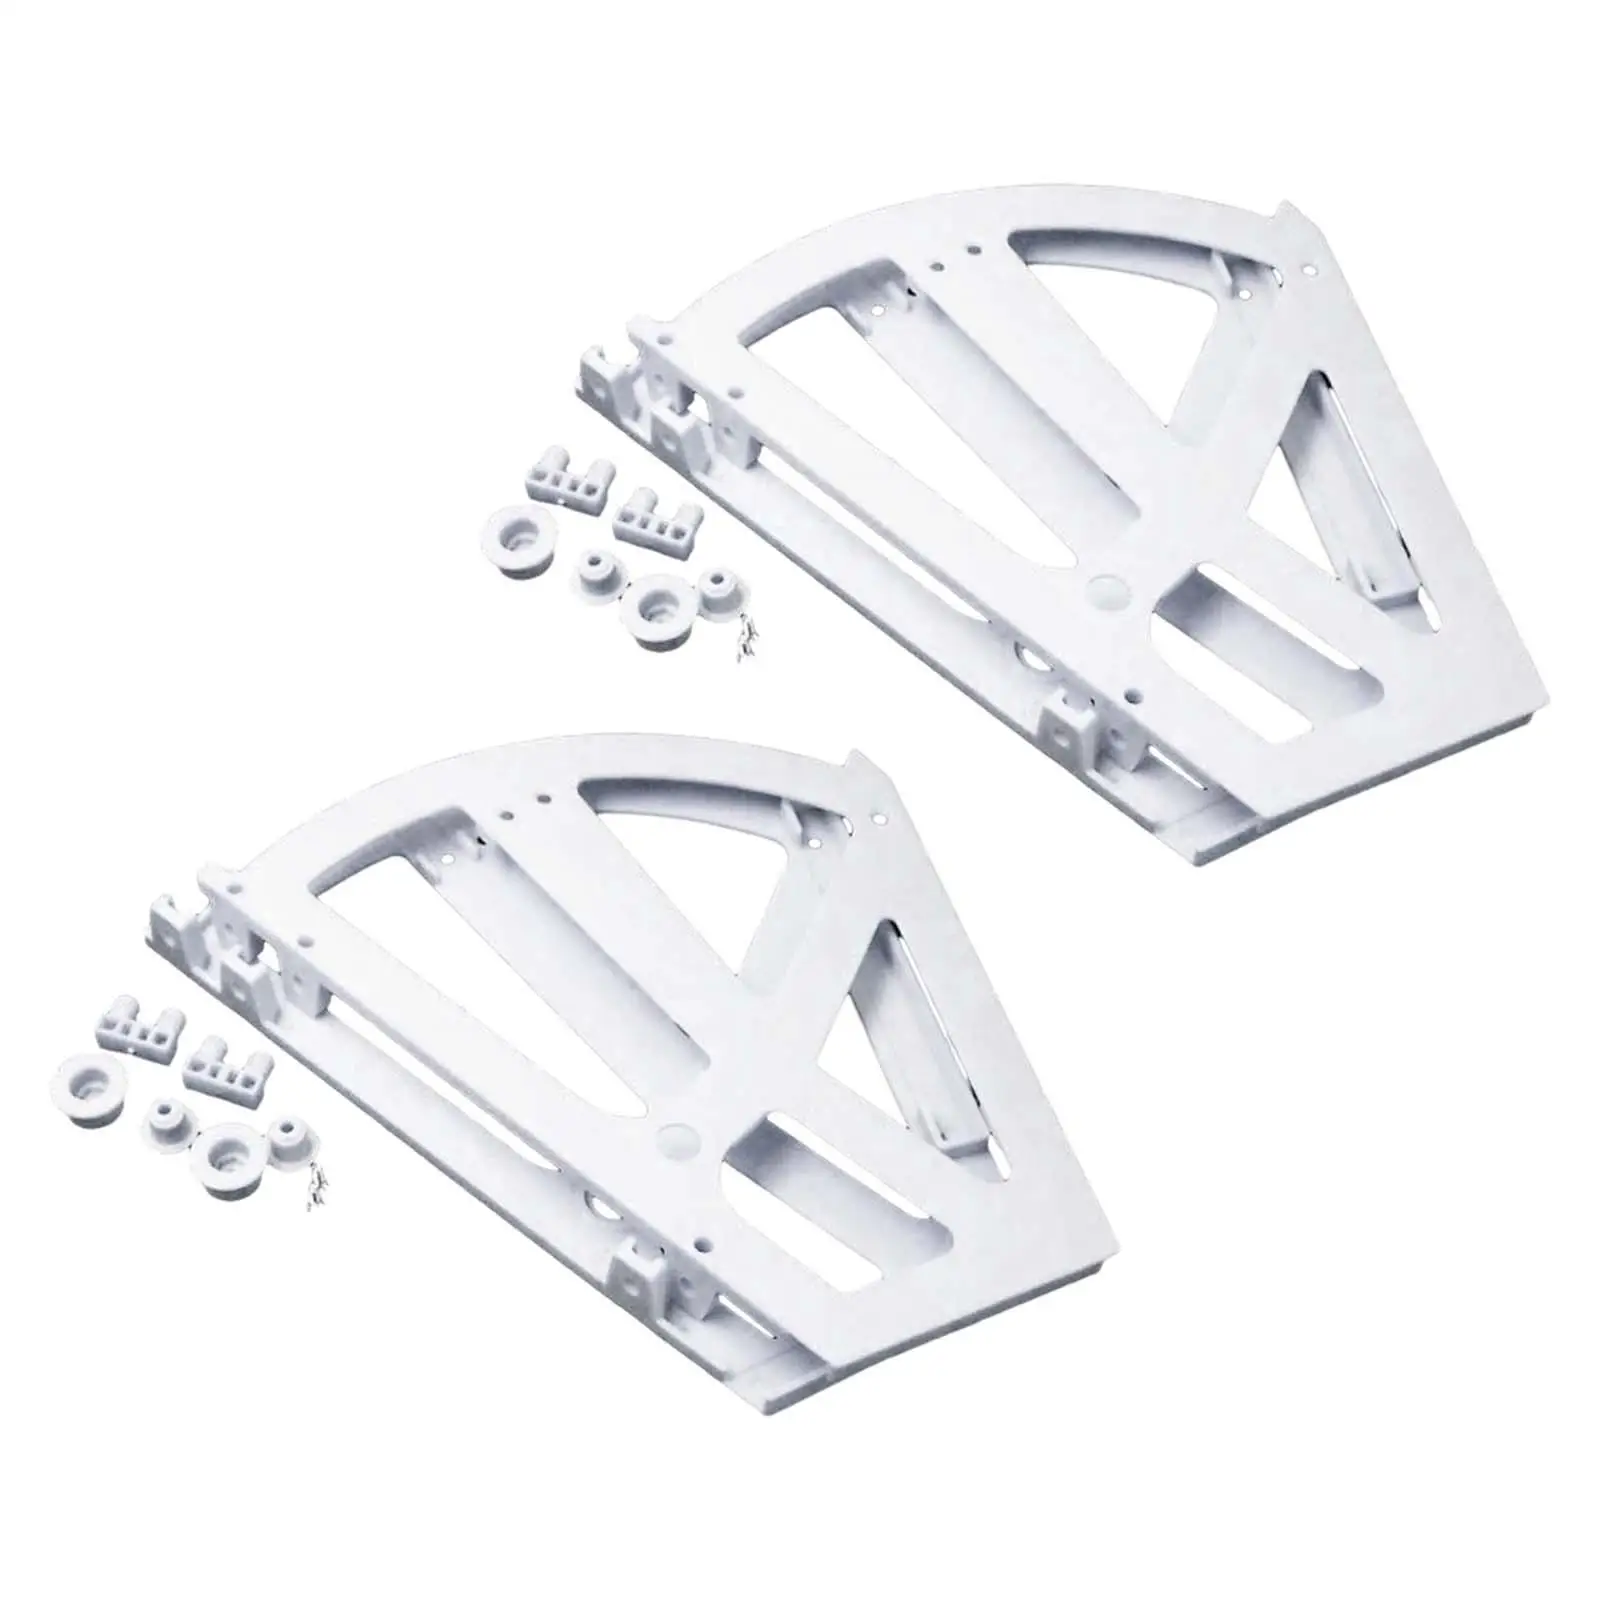 2Pcs Shoes Drawer Hinge Shoes Drawer Flipping Frame, Home Furniture Bedroom Easy to Install Tipping Shoes Drawer Accessories